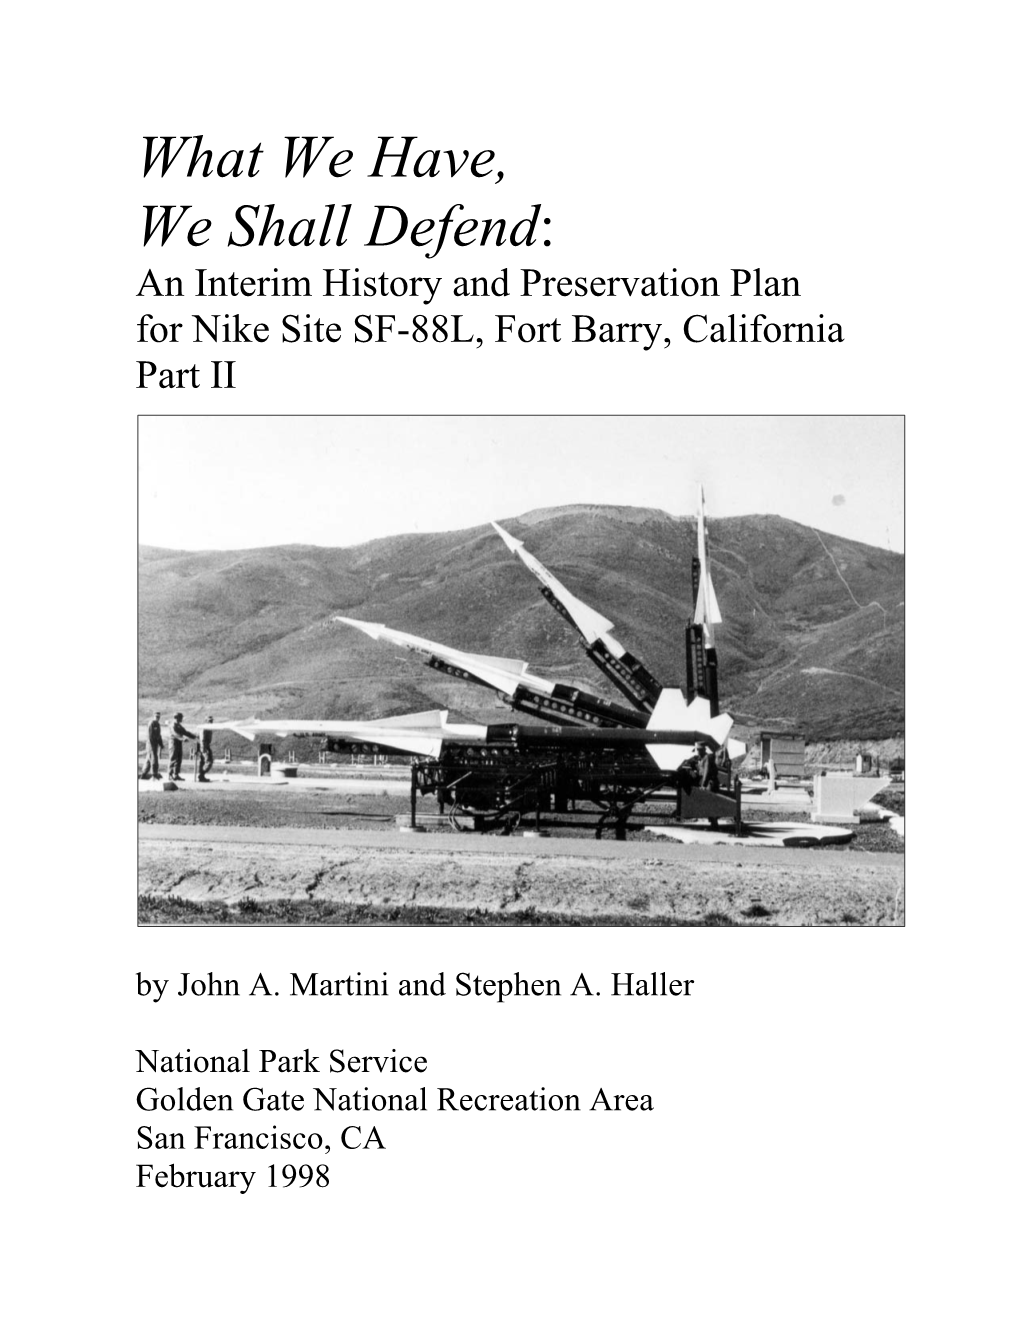 What We Have, We Shall Defend: an Interim History and Preservation Plan for Nike Site SF-88L, Fort Barry, California Part II